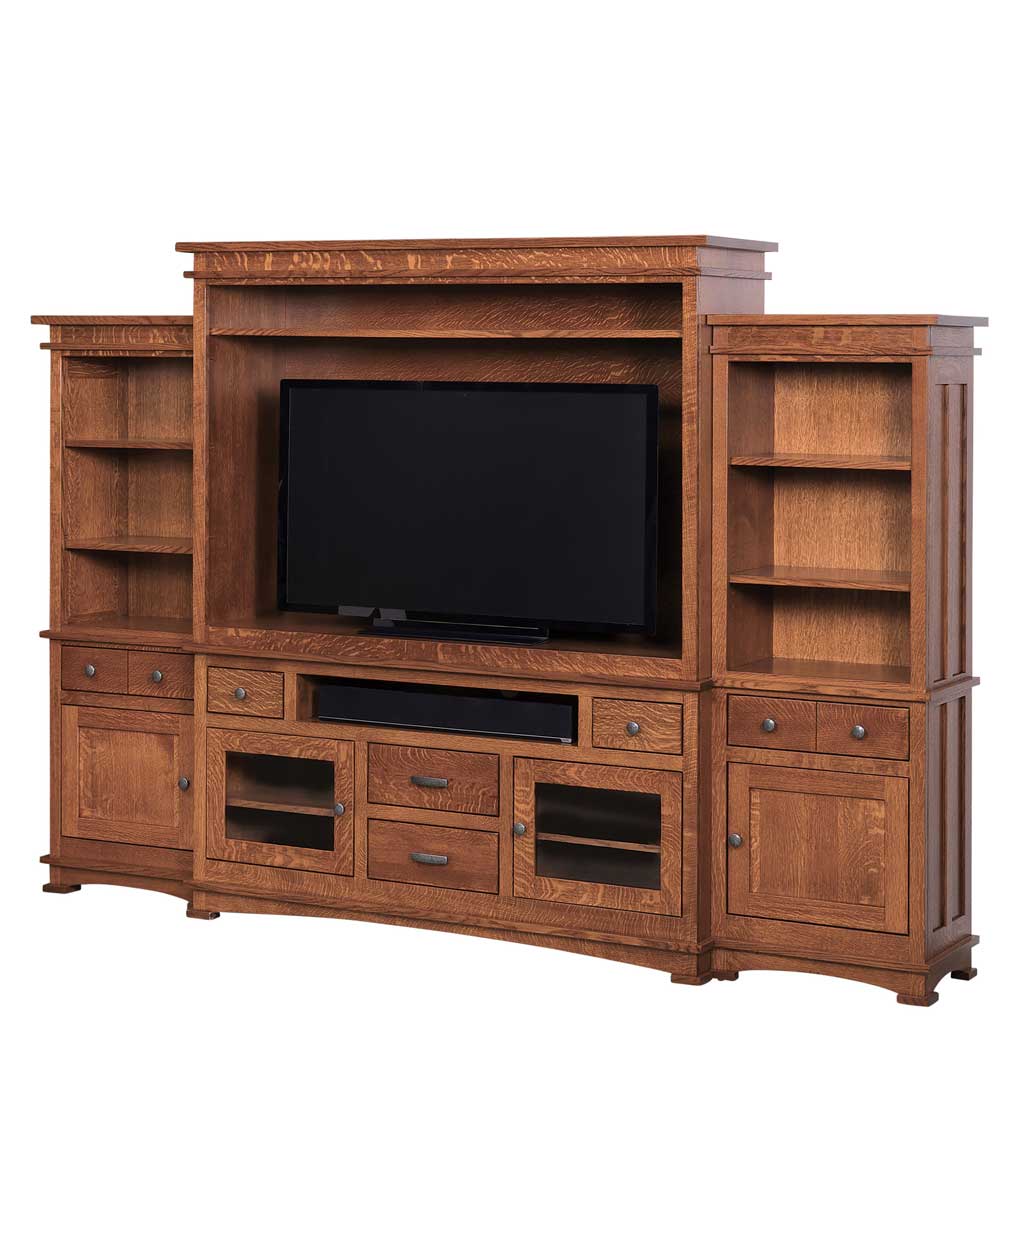 The Perfect Sized TV Stand for Your TV - Amish Direct Furniture